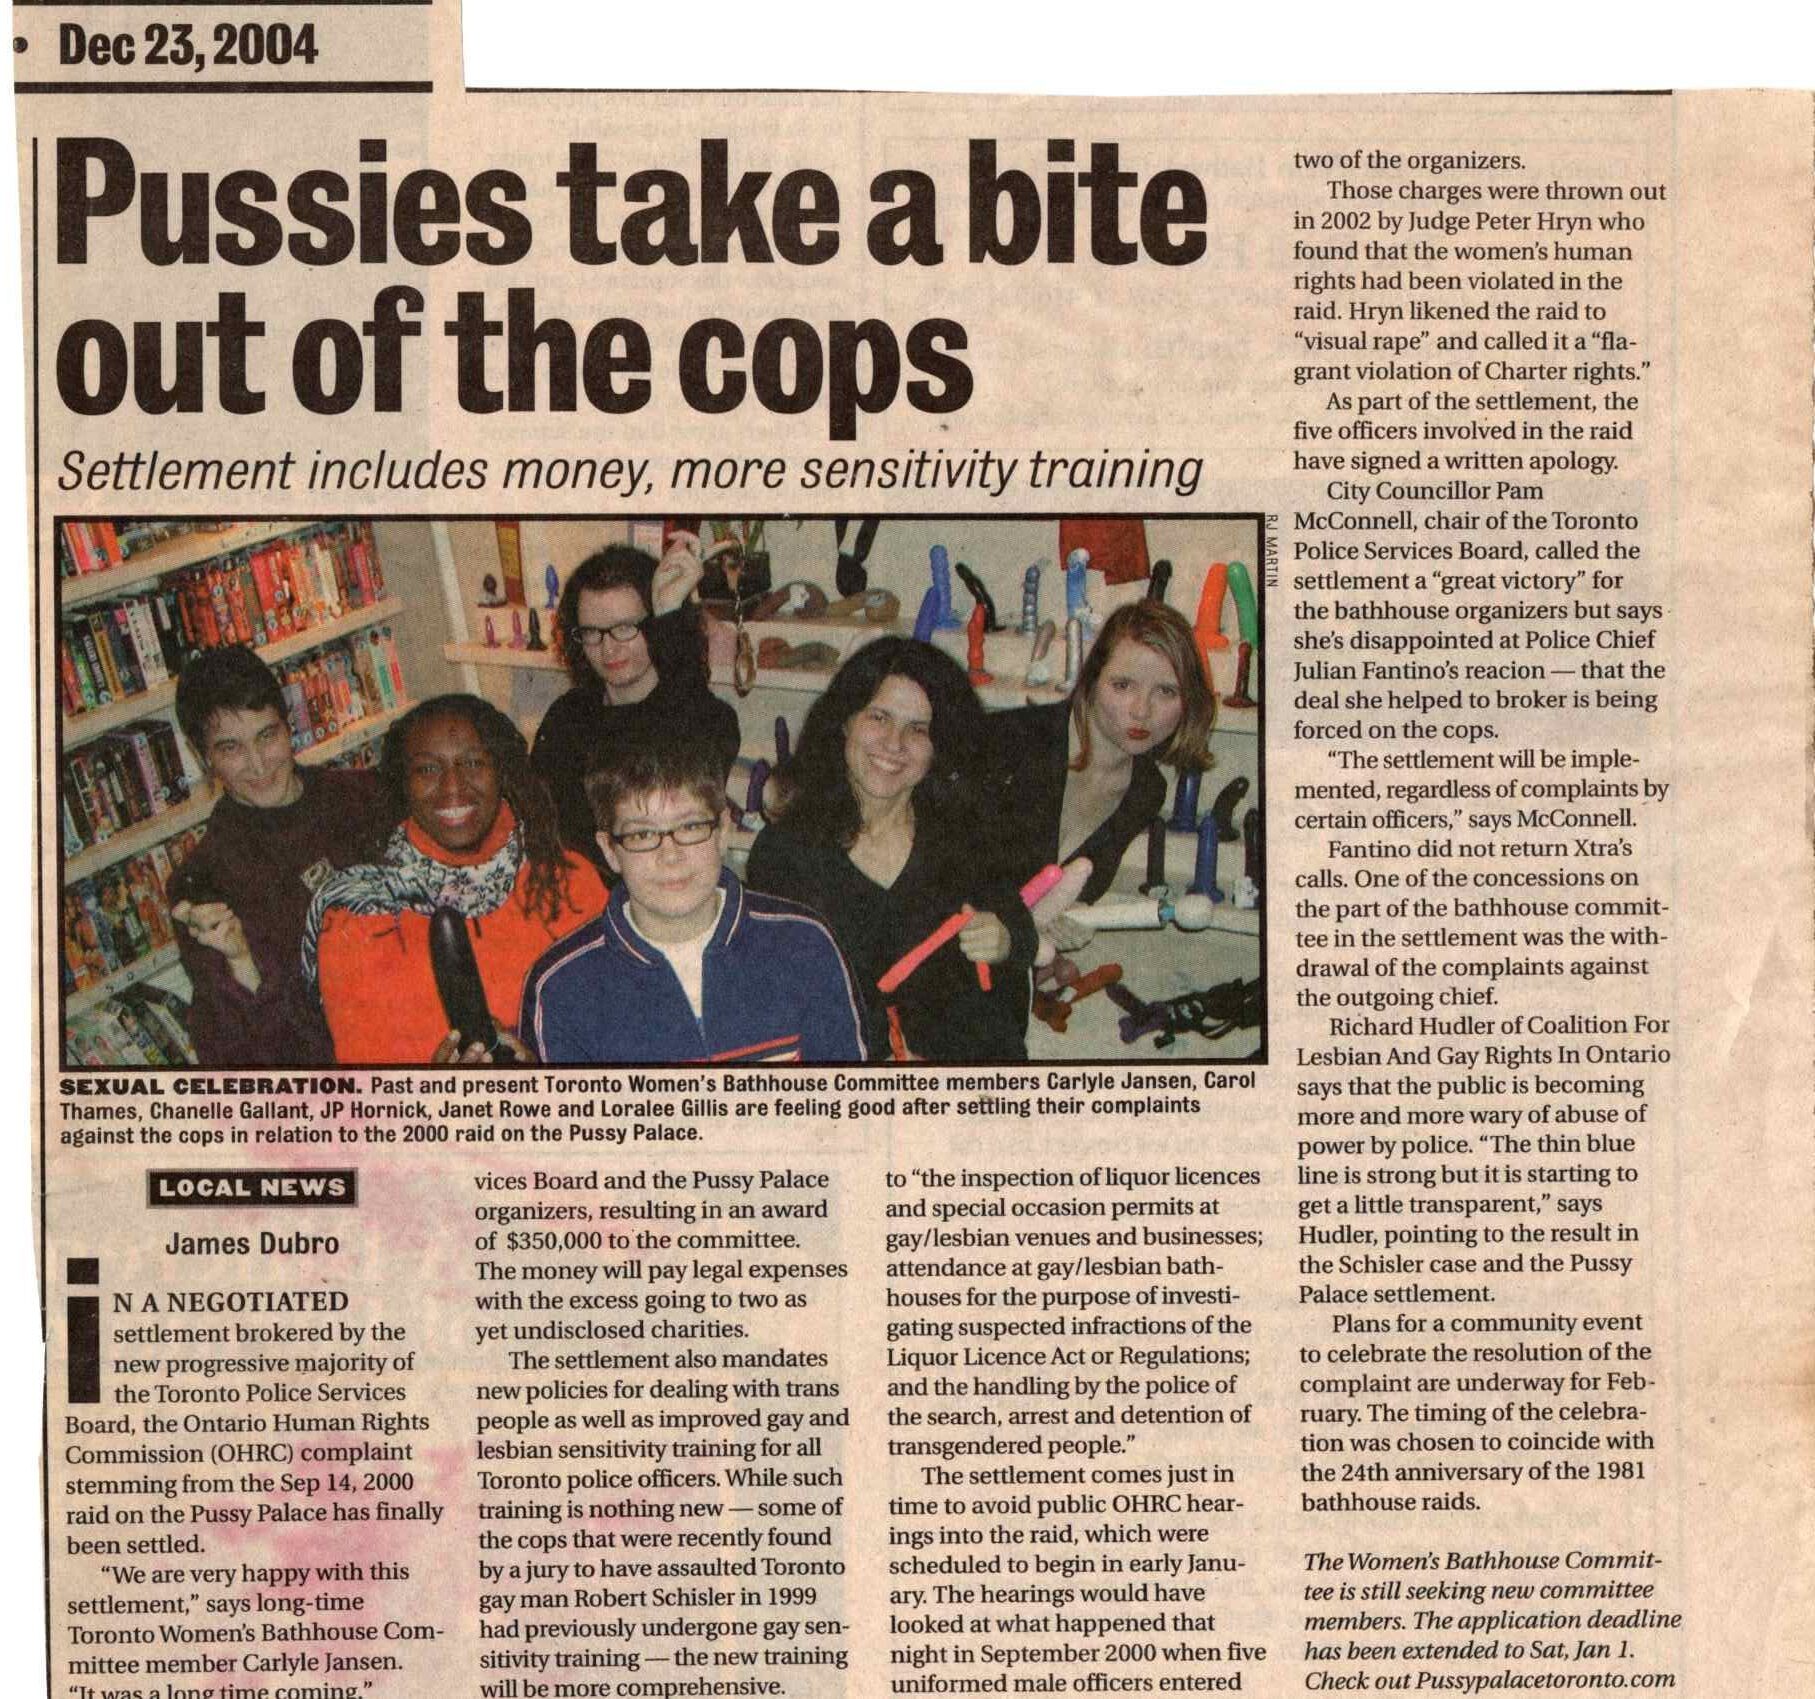 Newspaper Cover published December 23, 2004 titled Pussies take a bite out of the cops